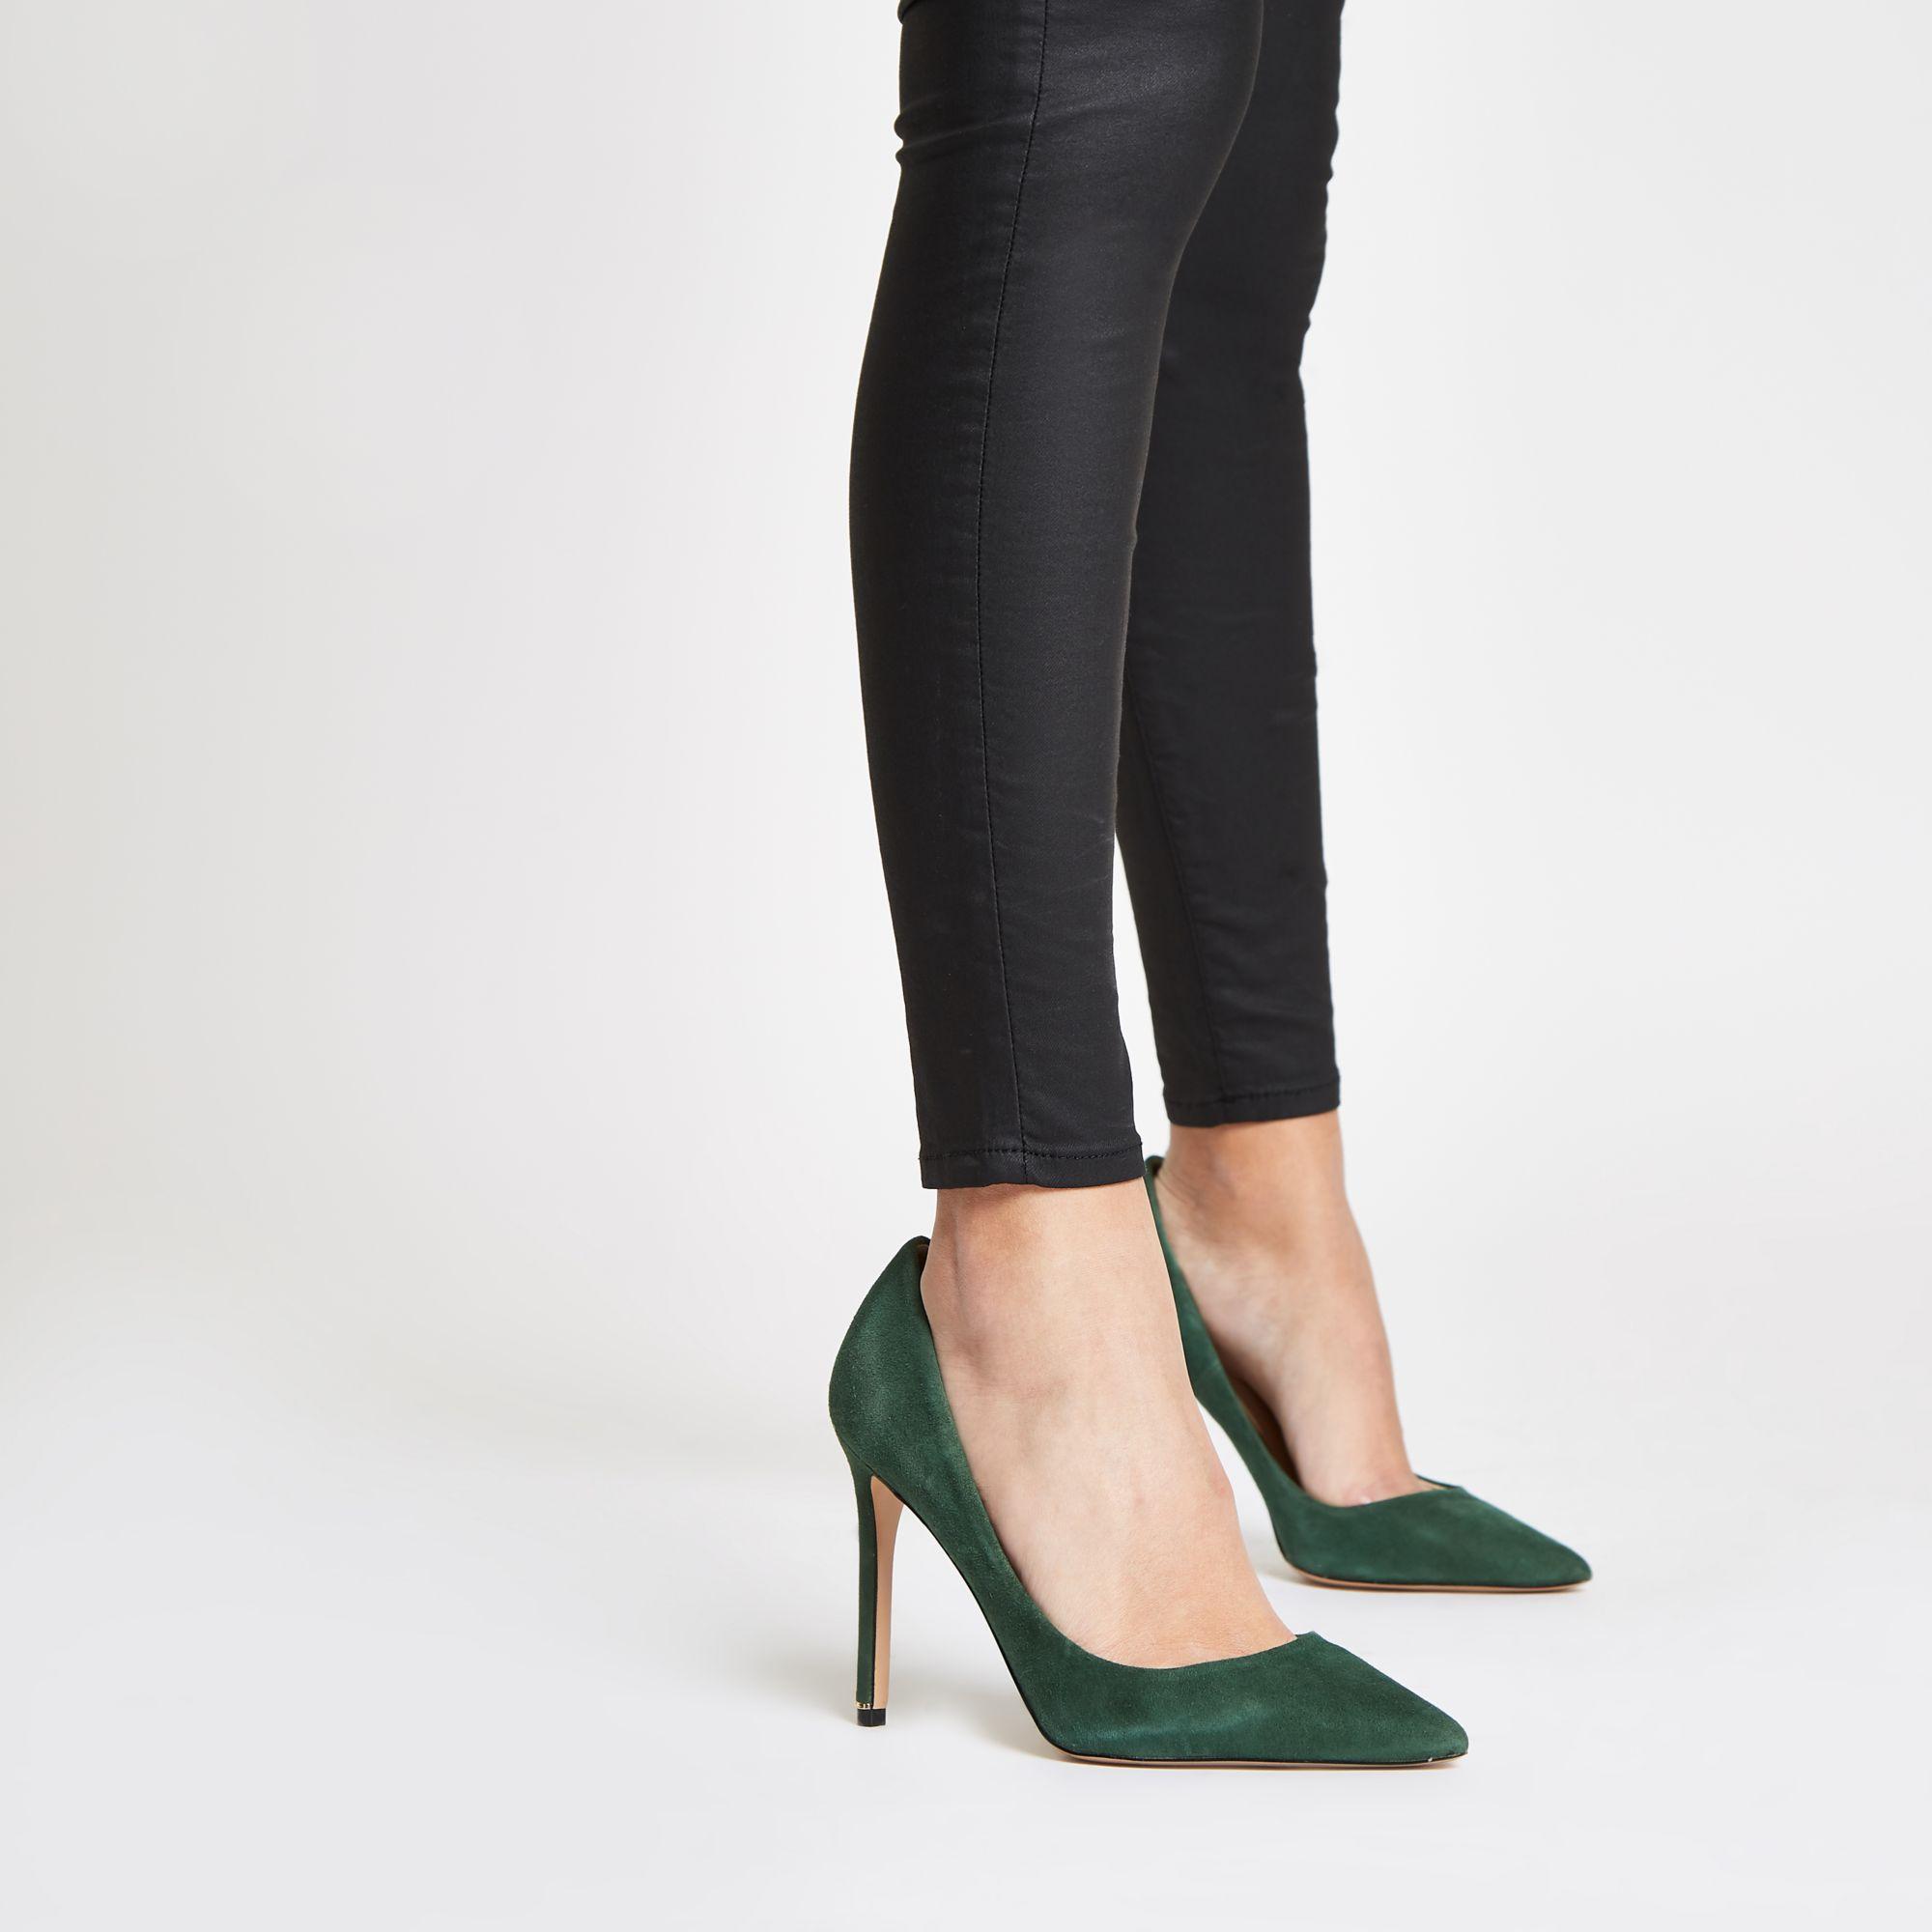 River Island Suede Court Shoes in Green | Lyst